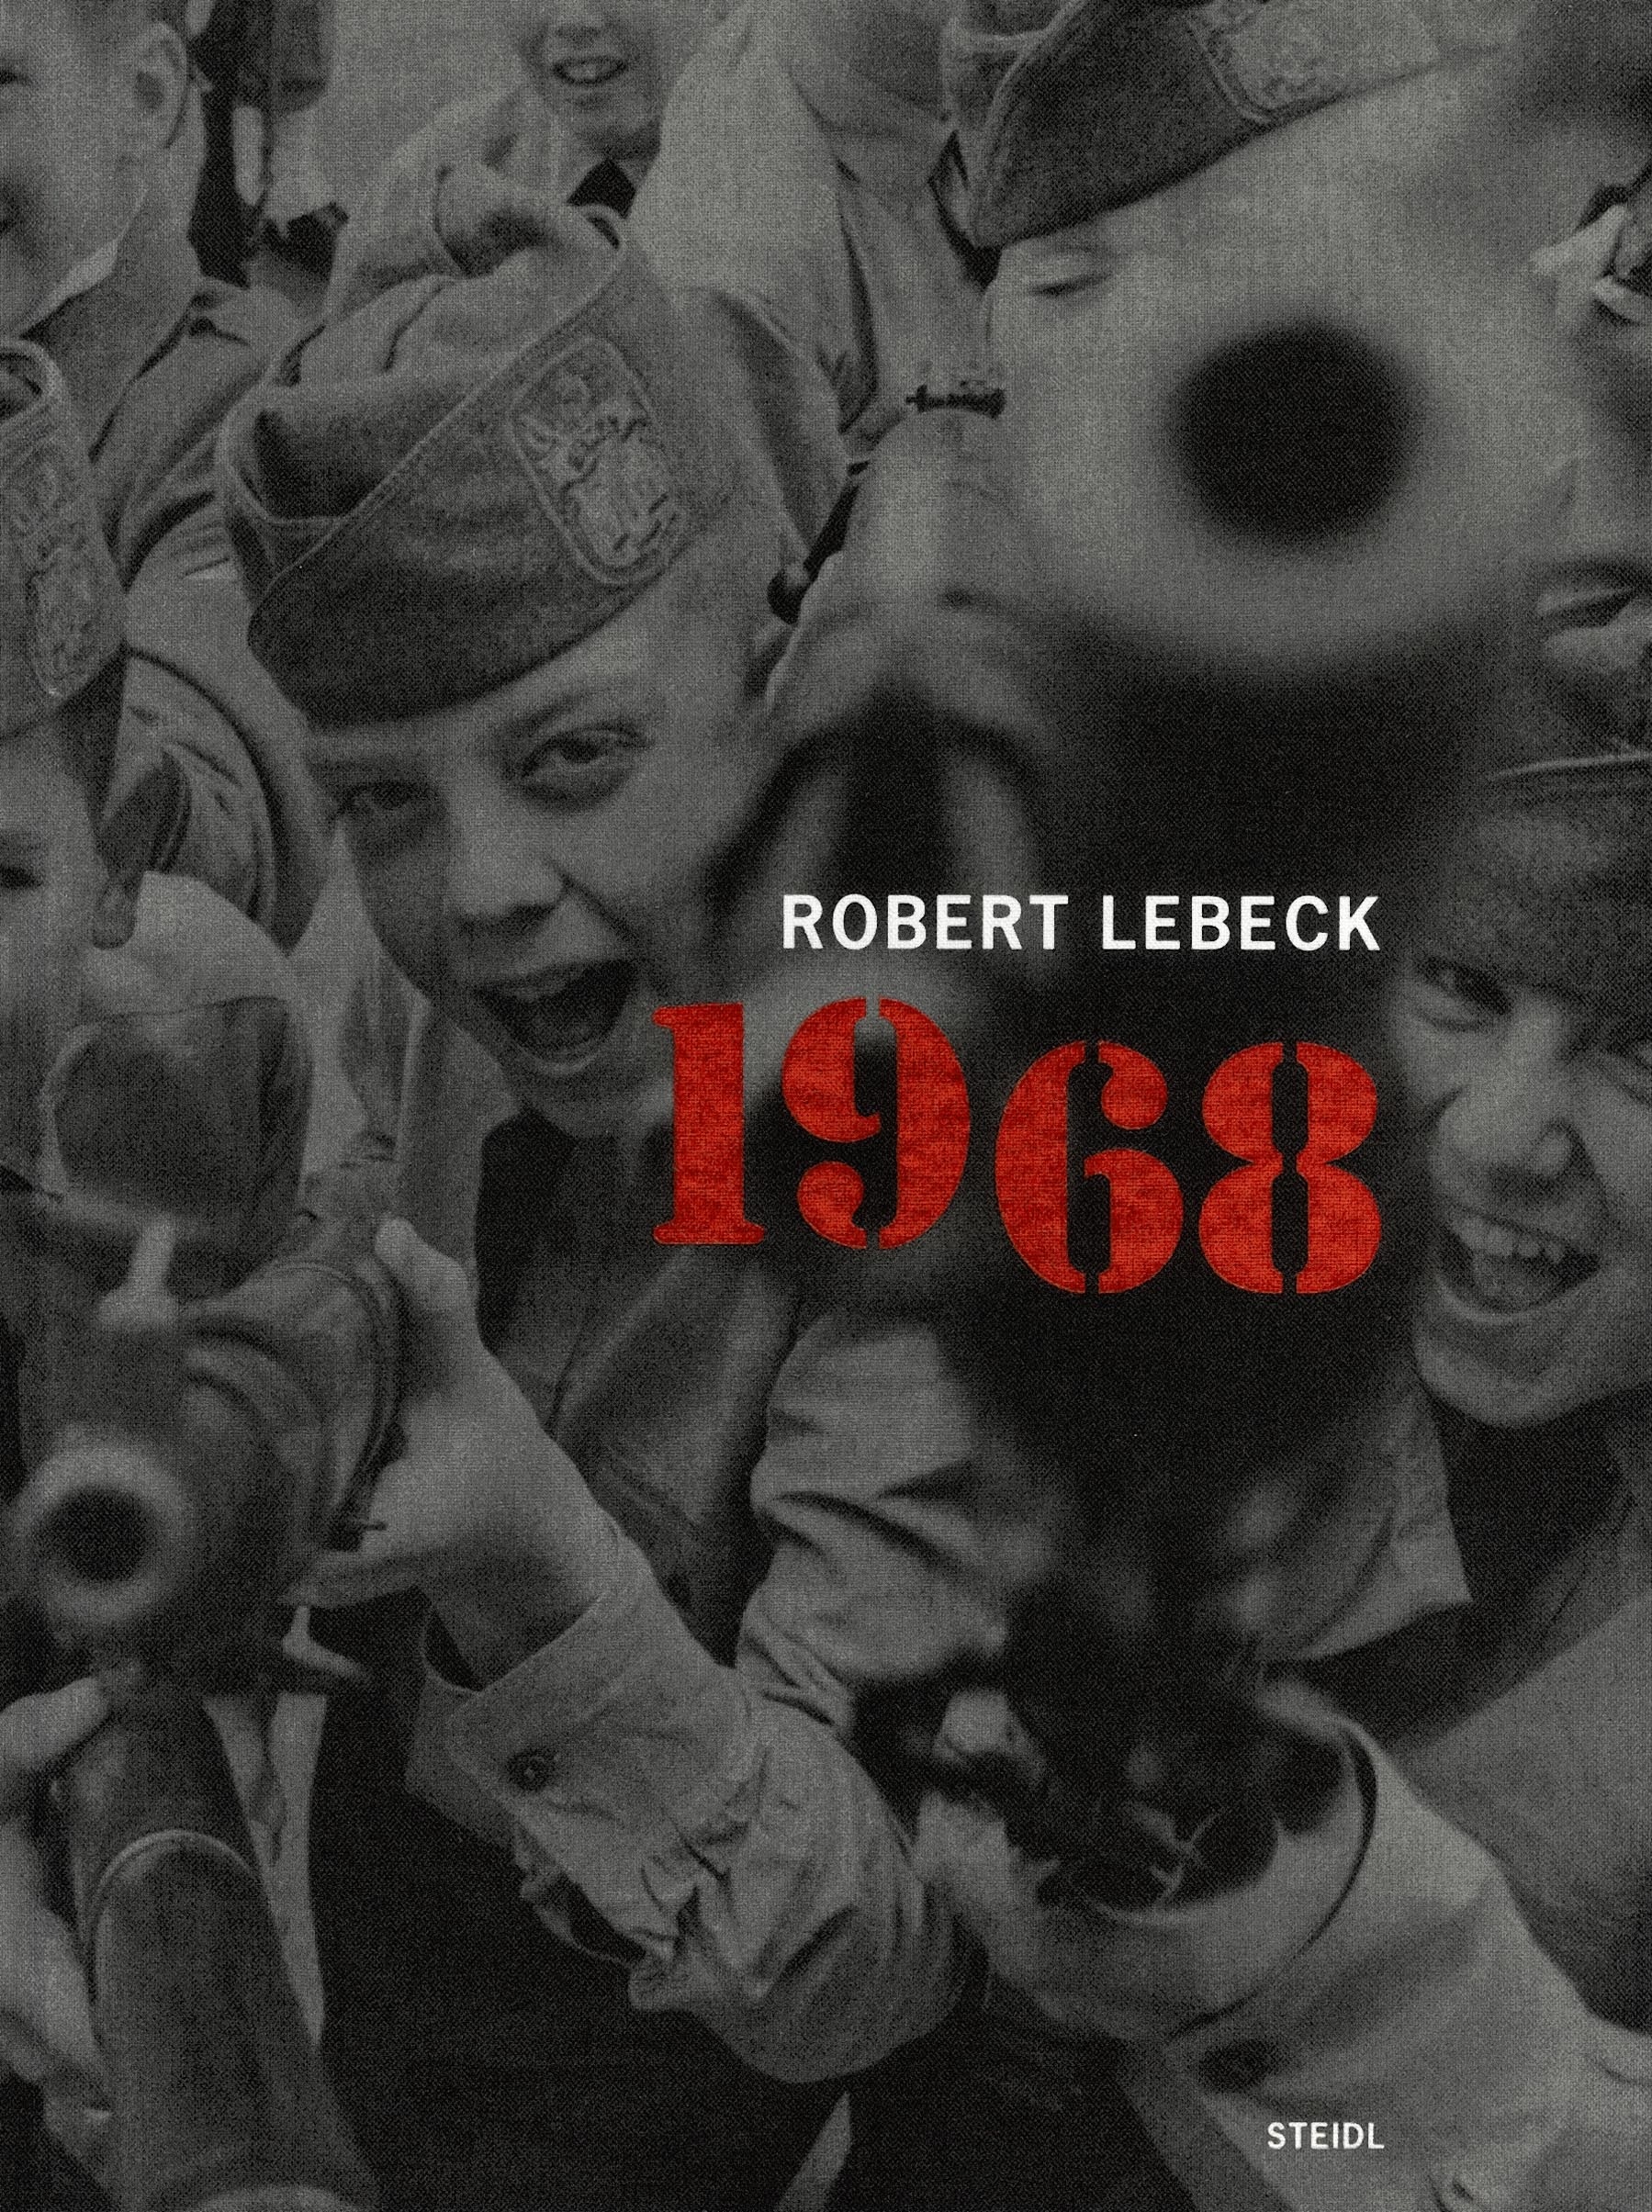 Title page of the book "Robert Lebeck. 1968"